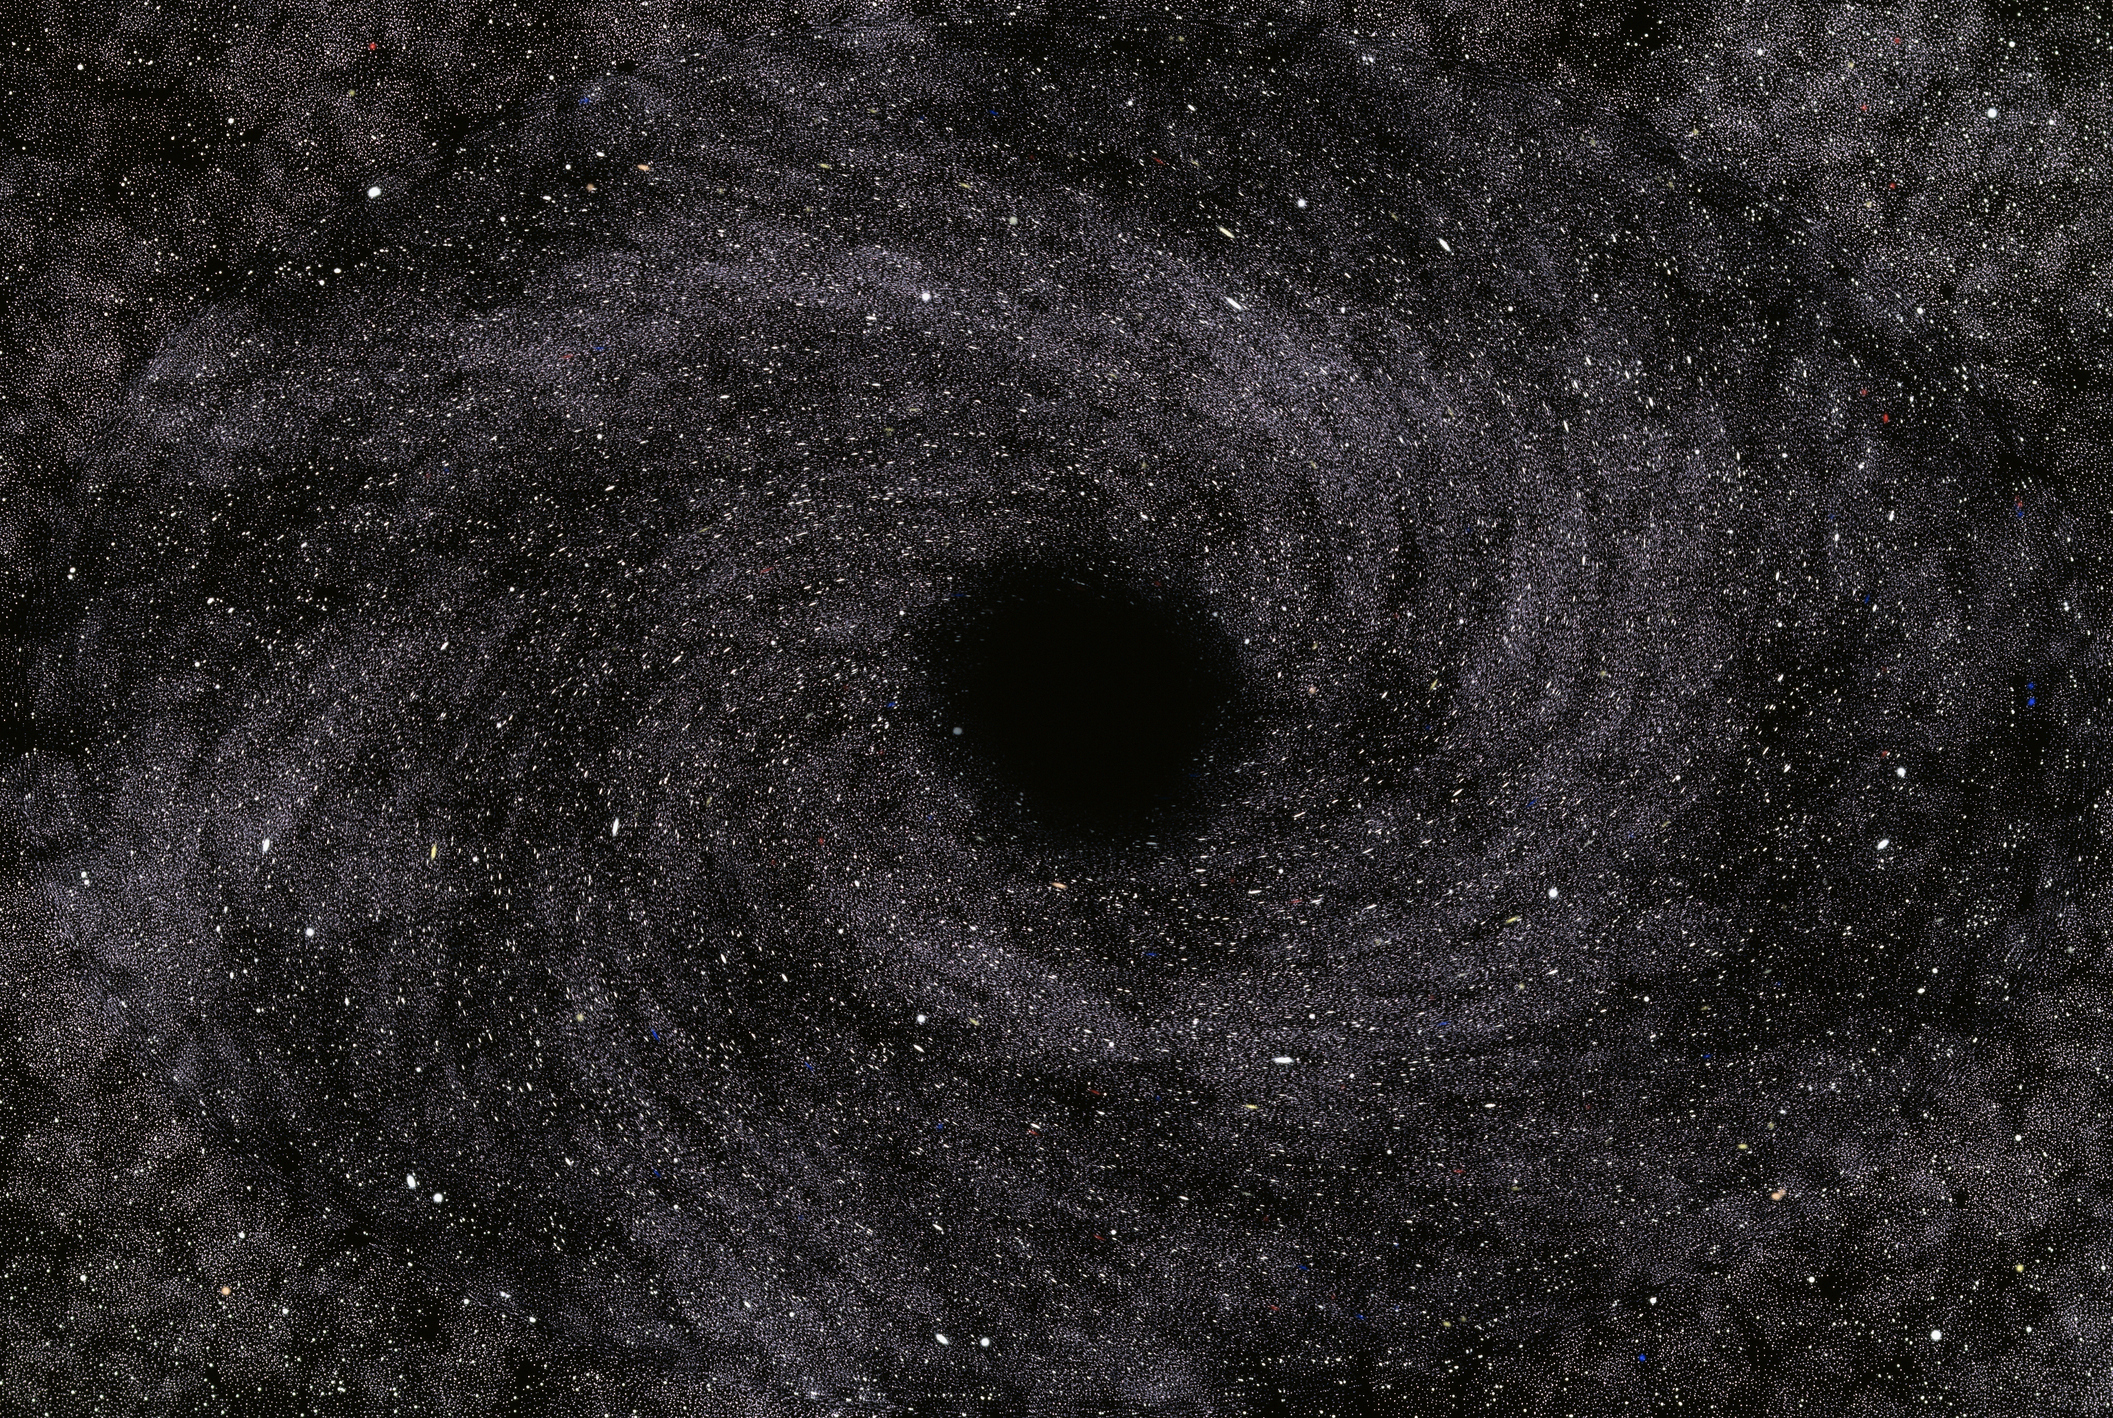 Scientists Are Hunting for a Mysteriously Missing Supermassive Black Hole.